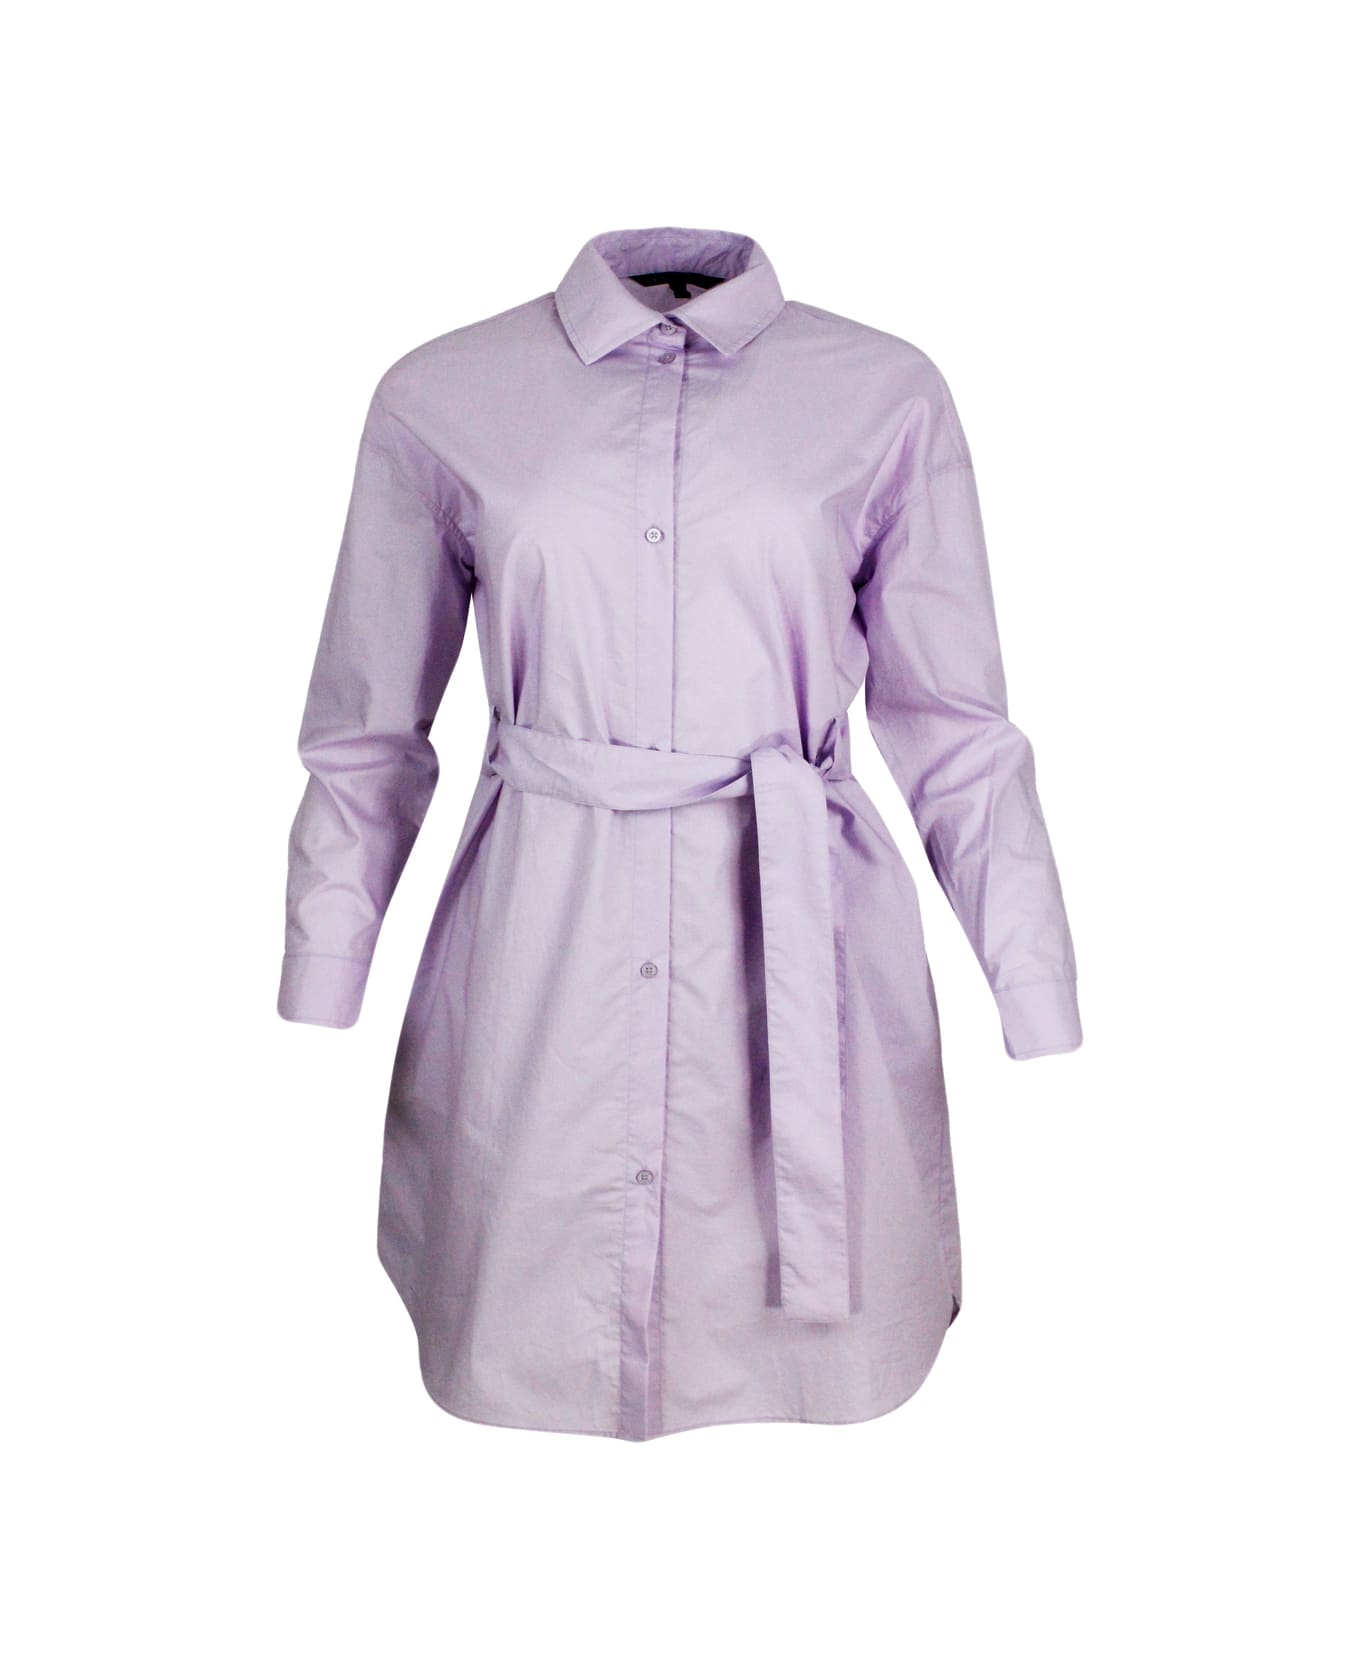 Armani Collezioni Dress Made Of Soft Cotton With Long Sleeves, With Button Closure On The Front And Belt. - Pink ワンピース＆ドレス